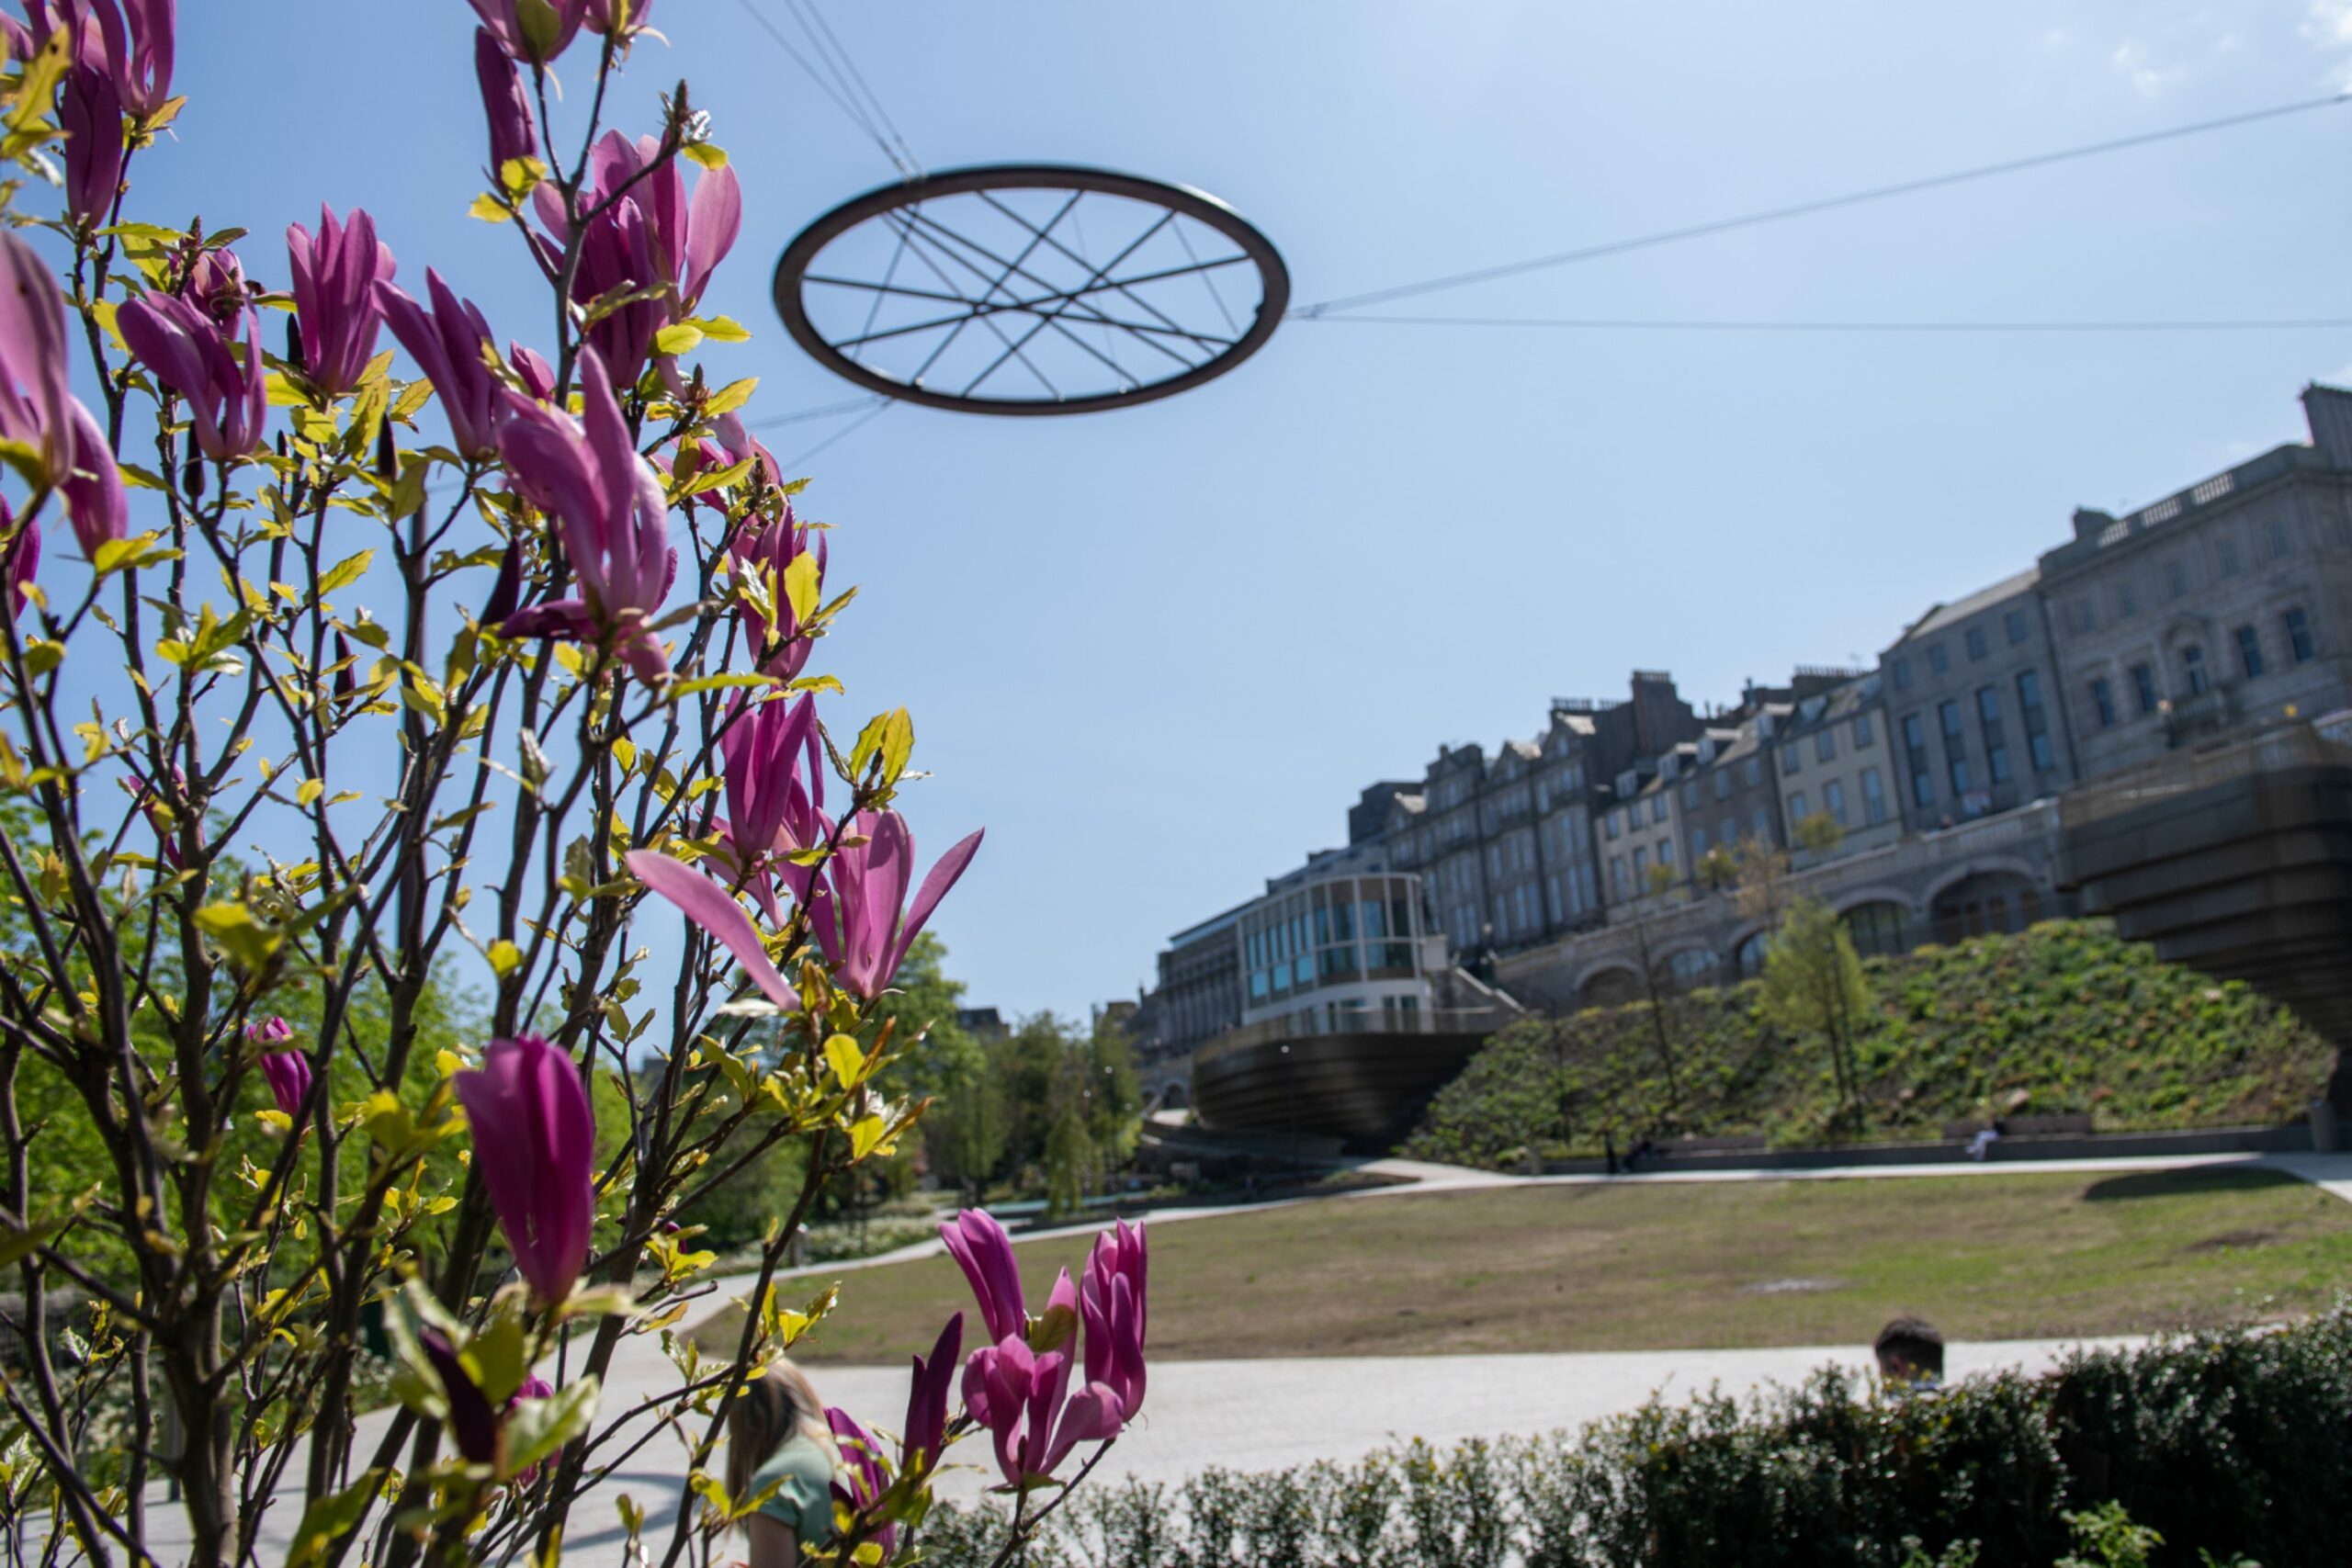 Union Terrace Gardens is coming alive as summer arrives in Aberdeen. Image: Alastair Gossip/DC Thomson